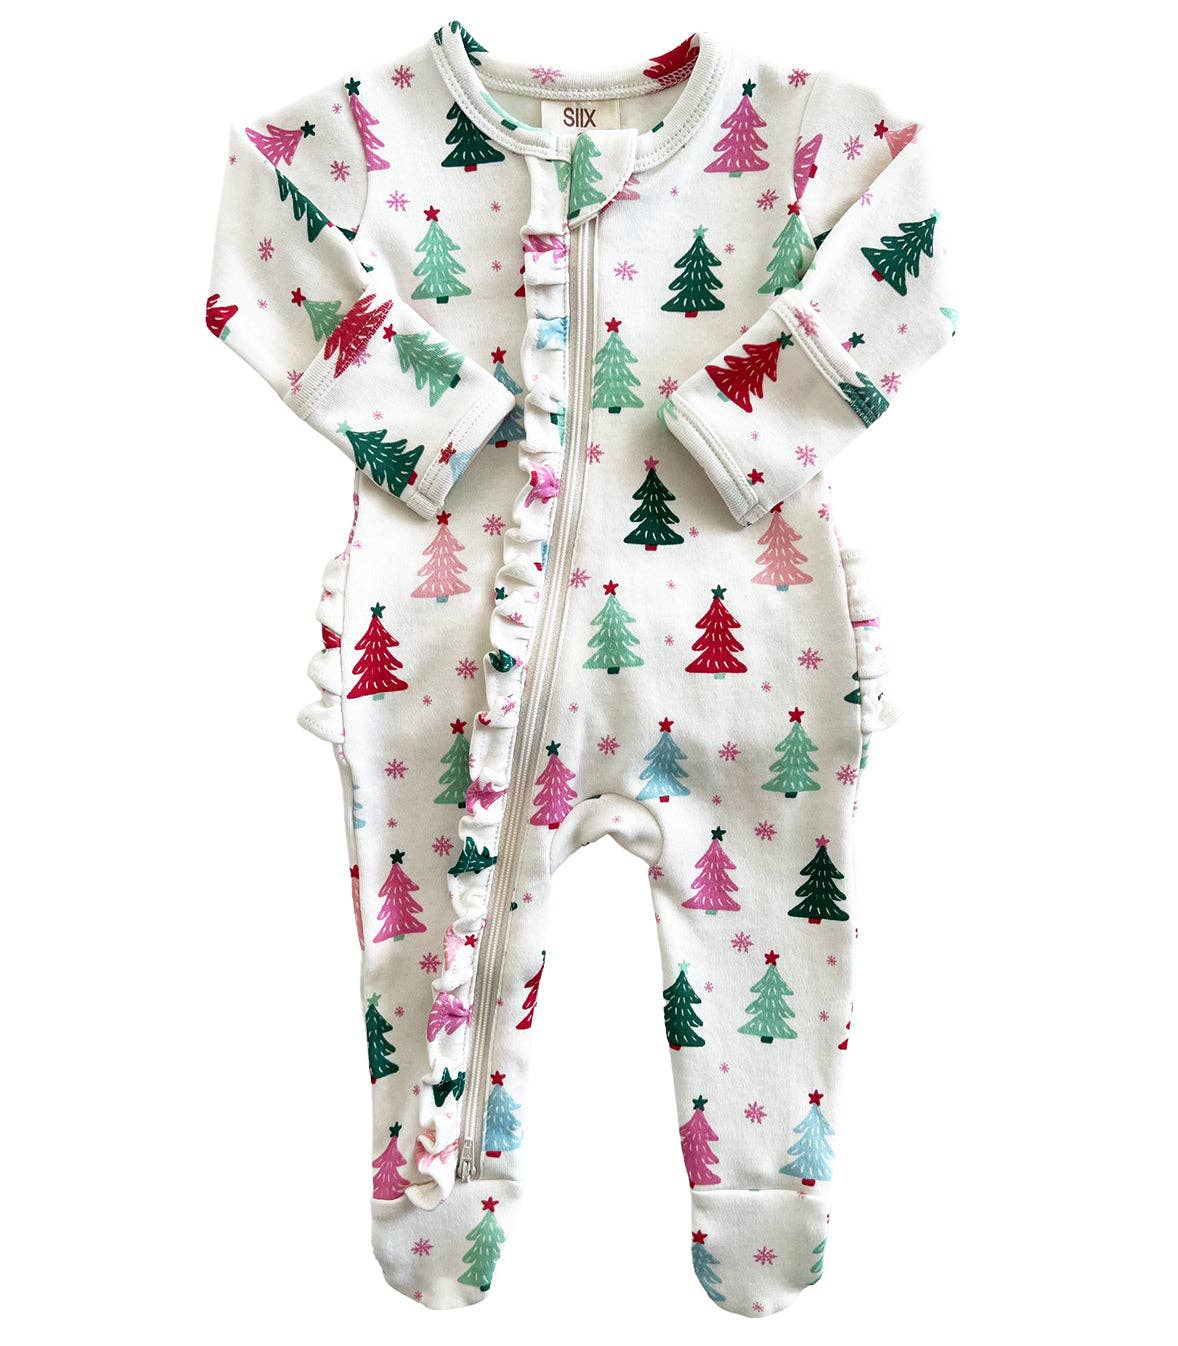 SIIX Collection - Christmas Trees Pink / Organic Frill Zip Footie